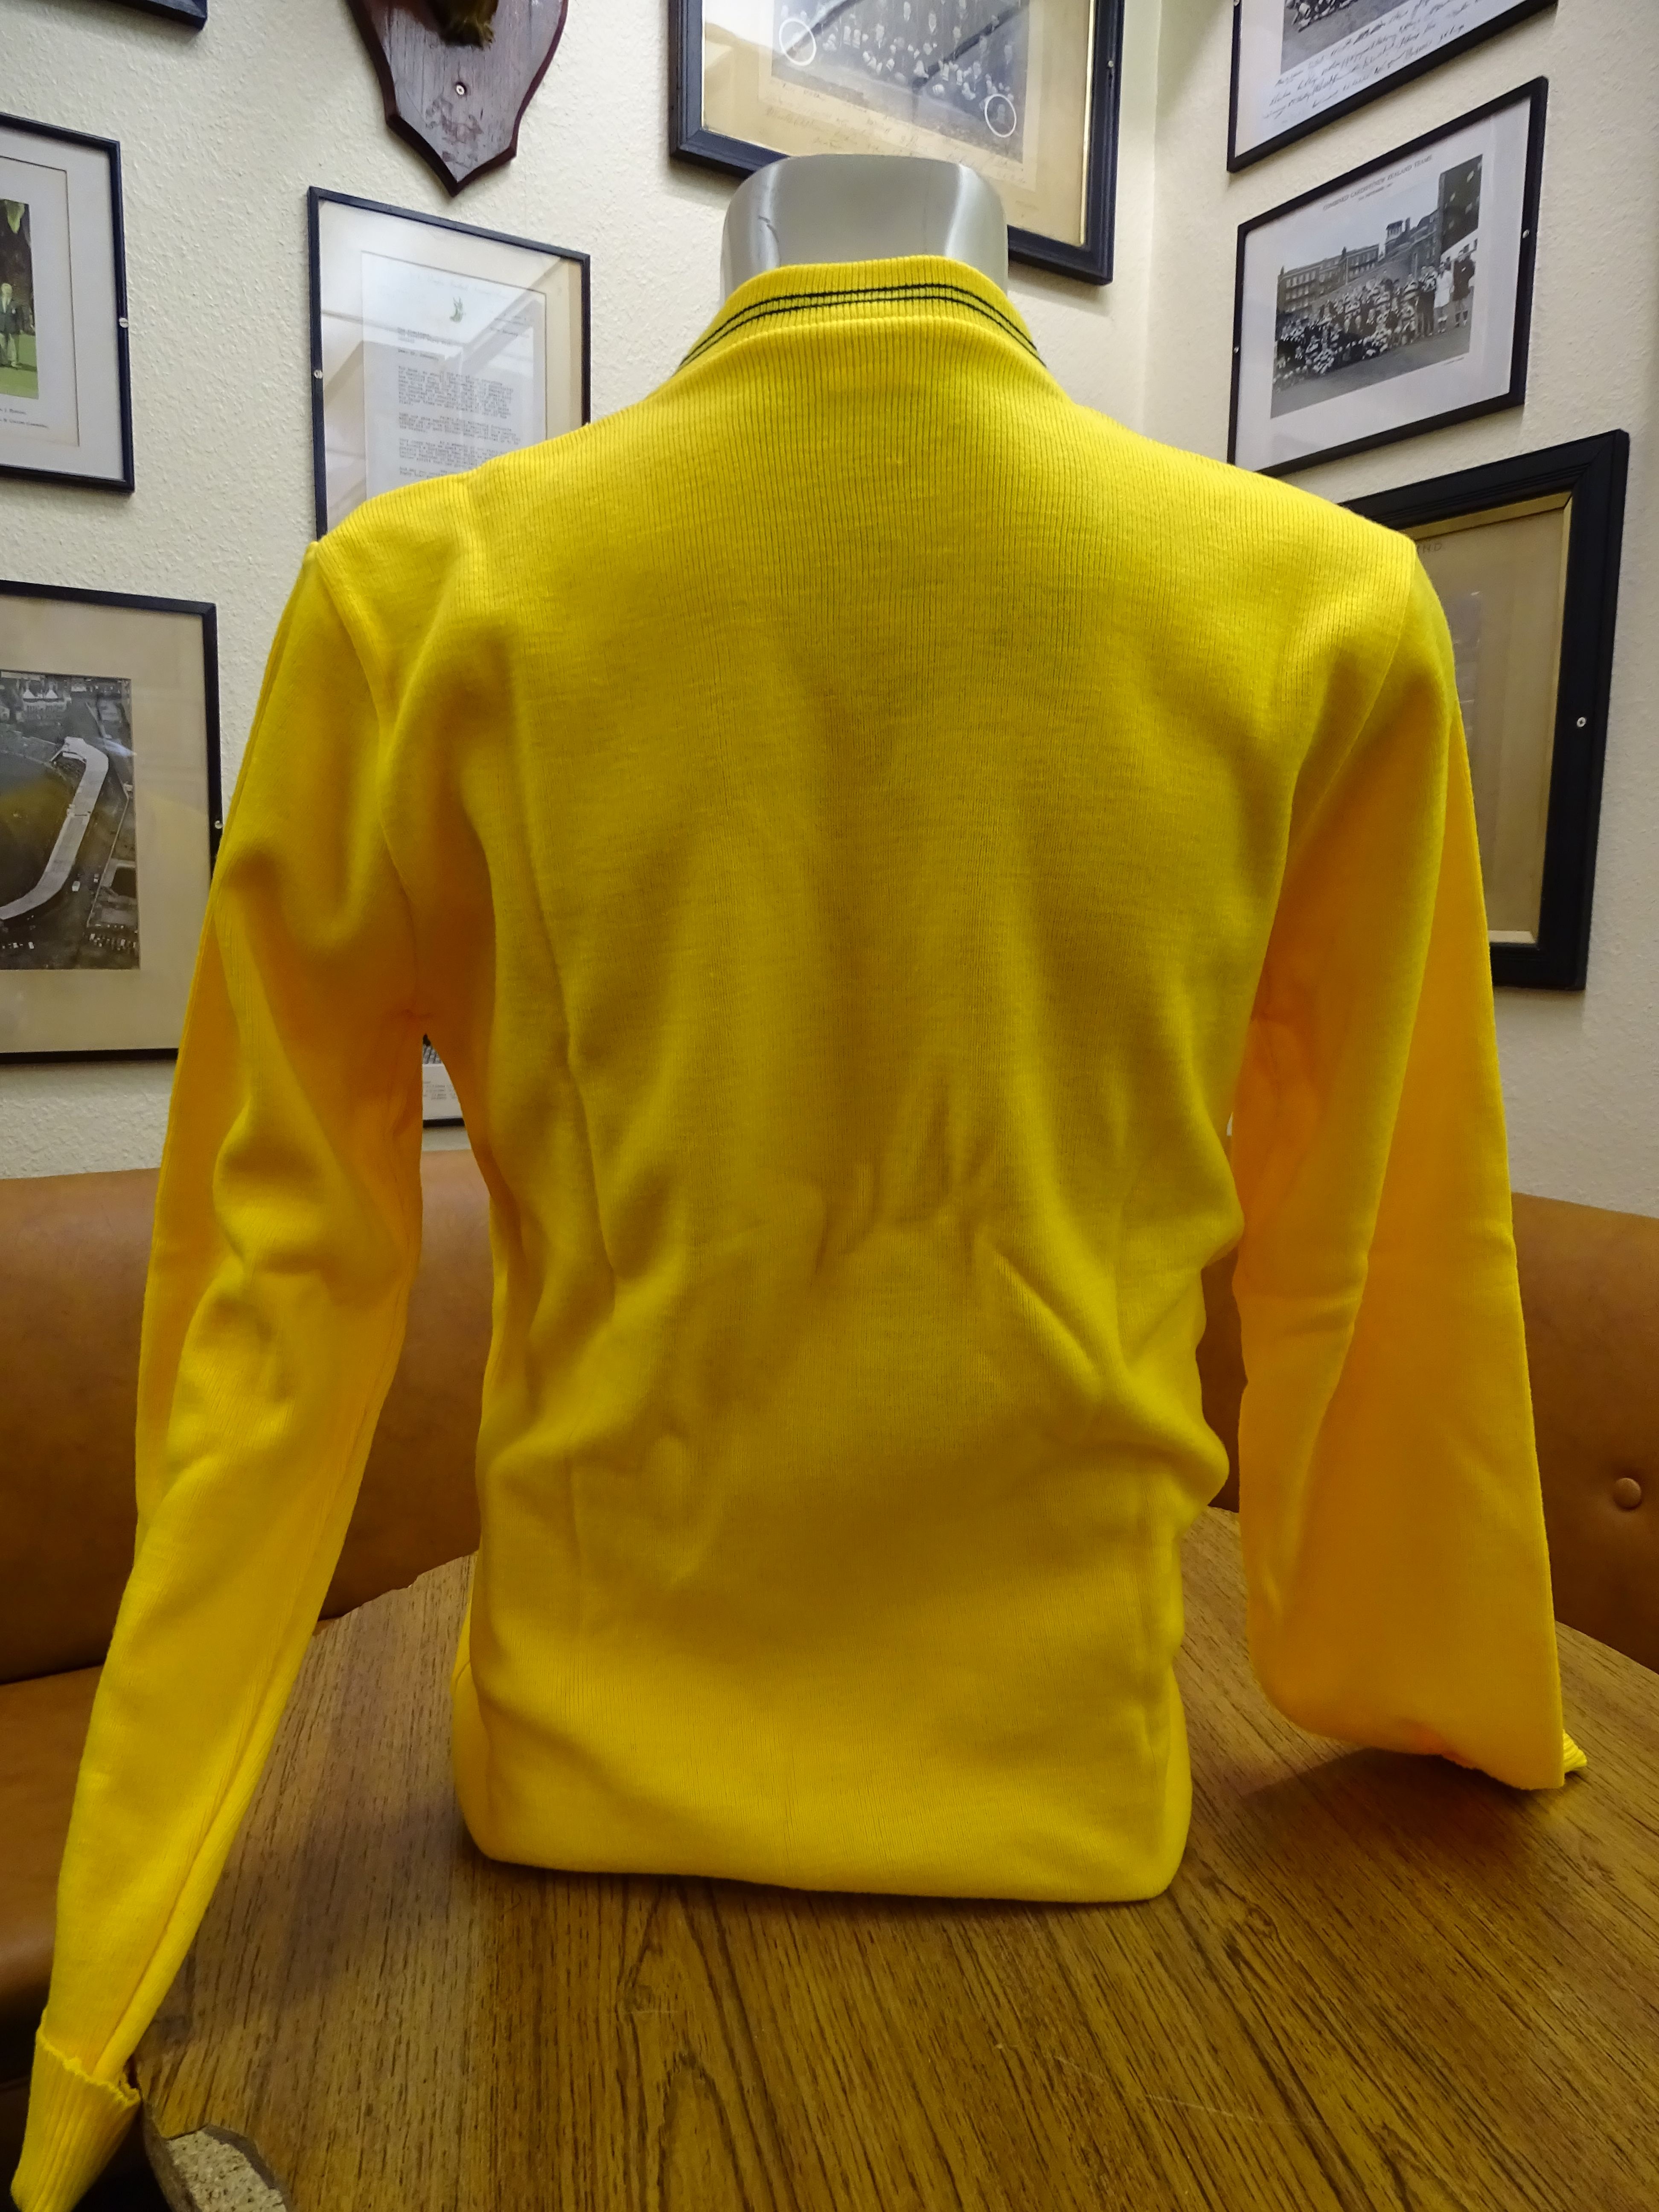 Wellington Rugby Referees Association Jumper | Cardiff Rugby Museum